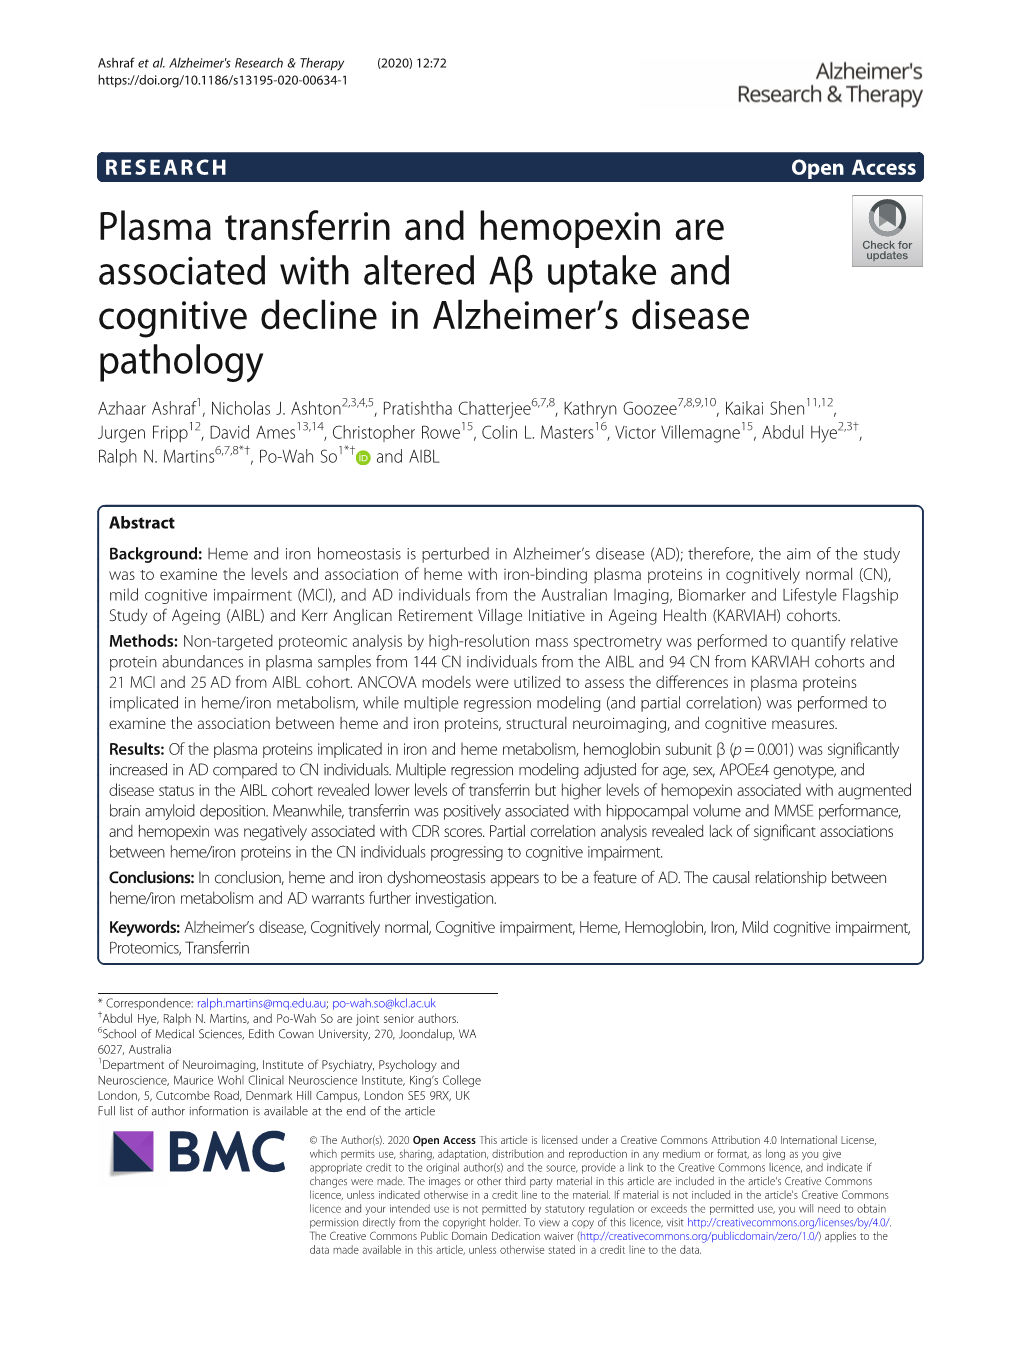 Plasma Transferrin and Hemopexin Are Associated with Altered Aβ Uptake and Cognitive Decline in Alzheimer’S Disease Pathology Azhaar Ashraf1, Nicholas J